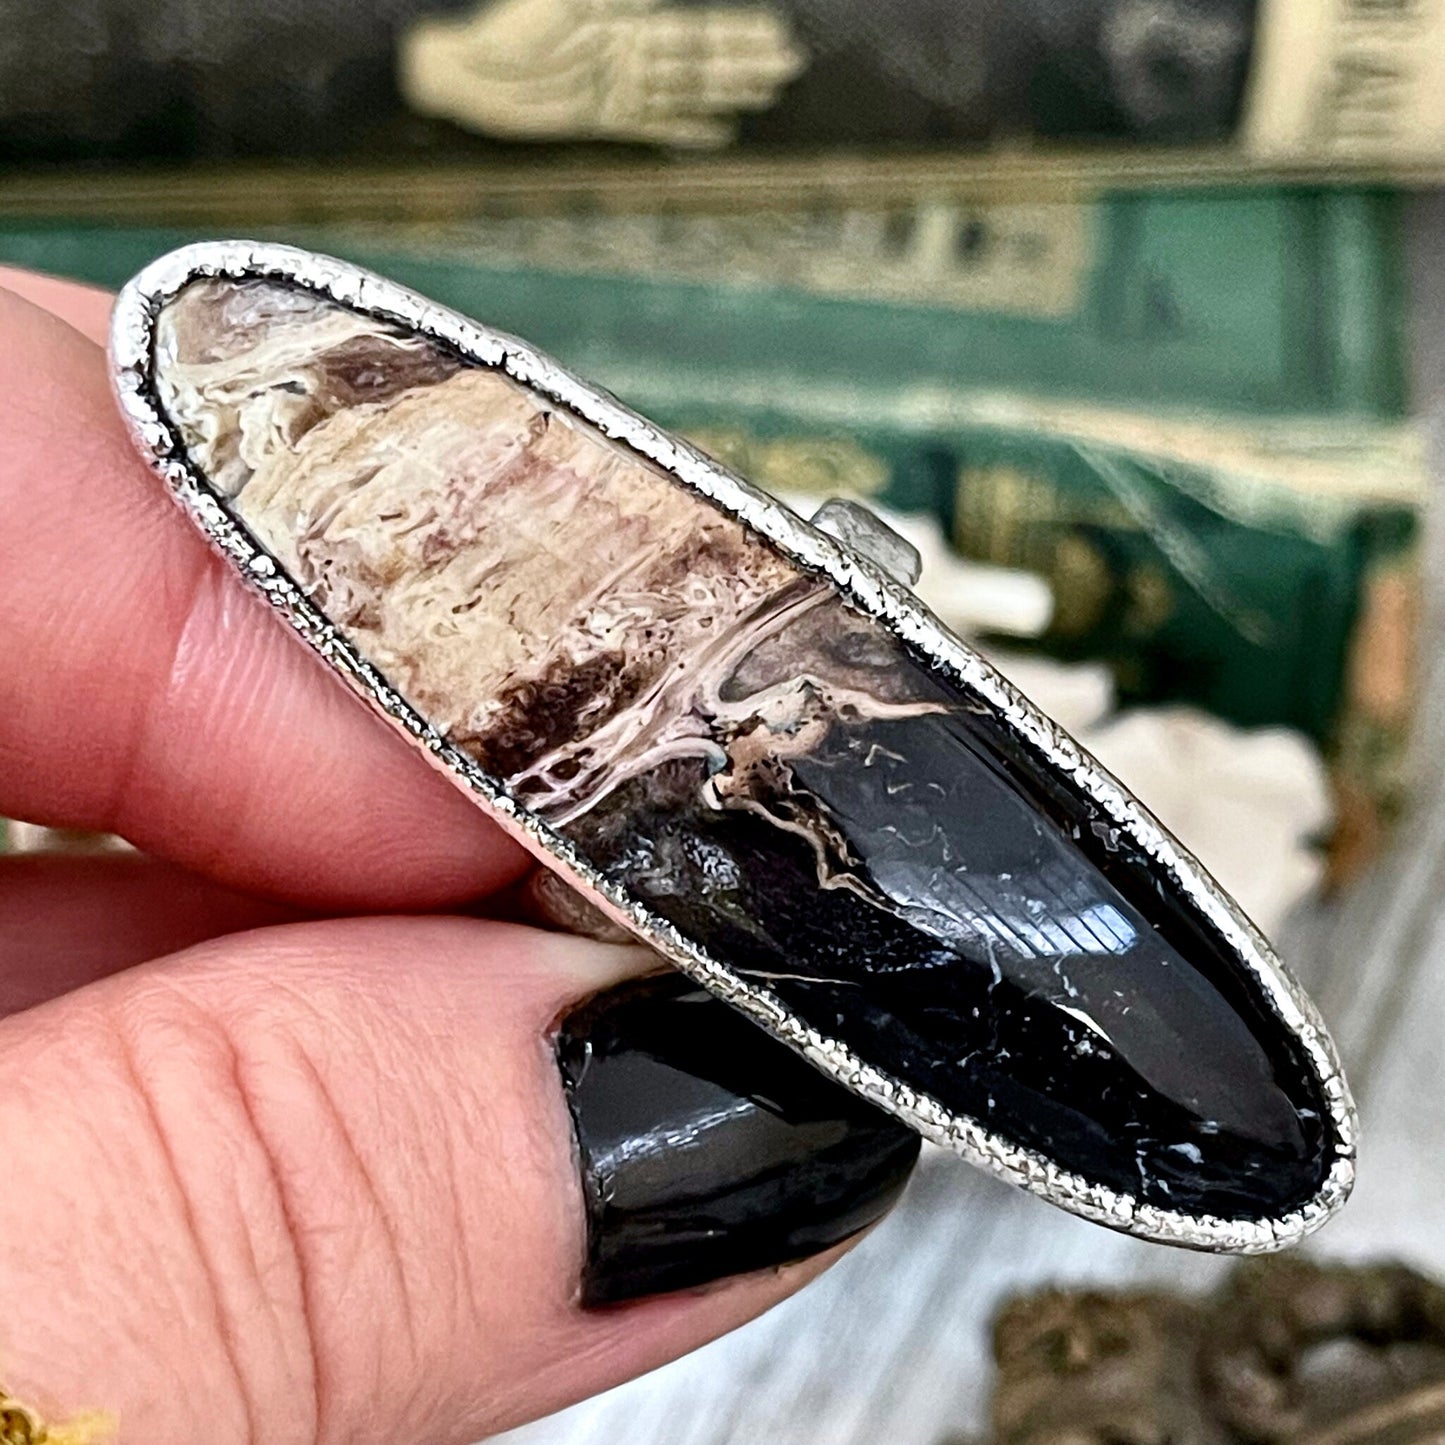 Size 7 Large Fossilized Palm Root Statement Ring in Fine Silver - Black Stone Ring / Foxlark Collection - One of a Kind